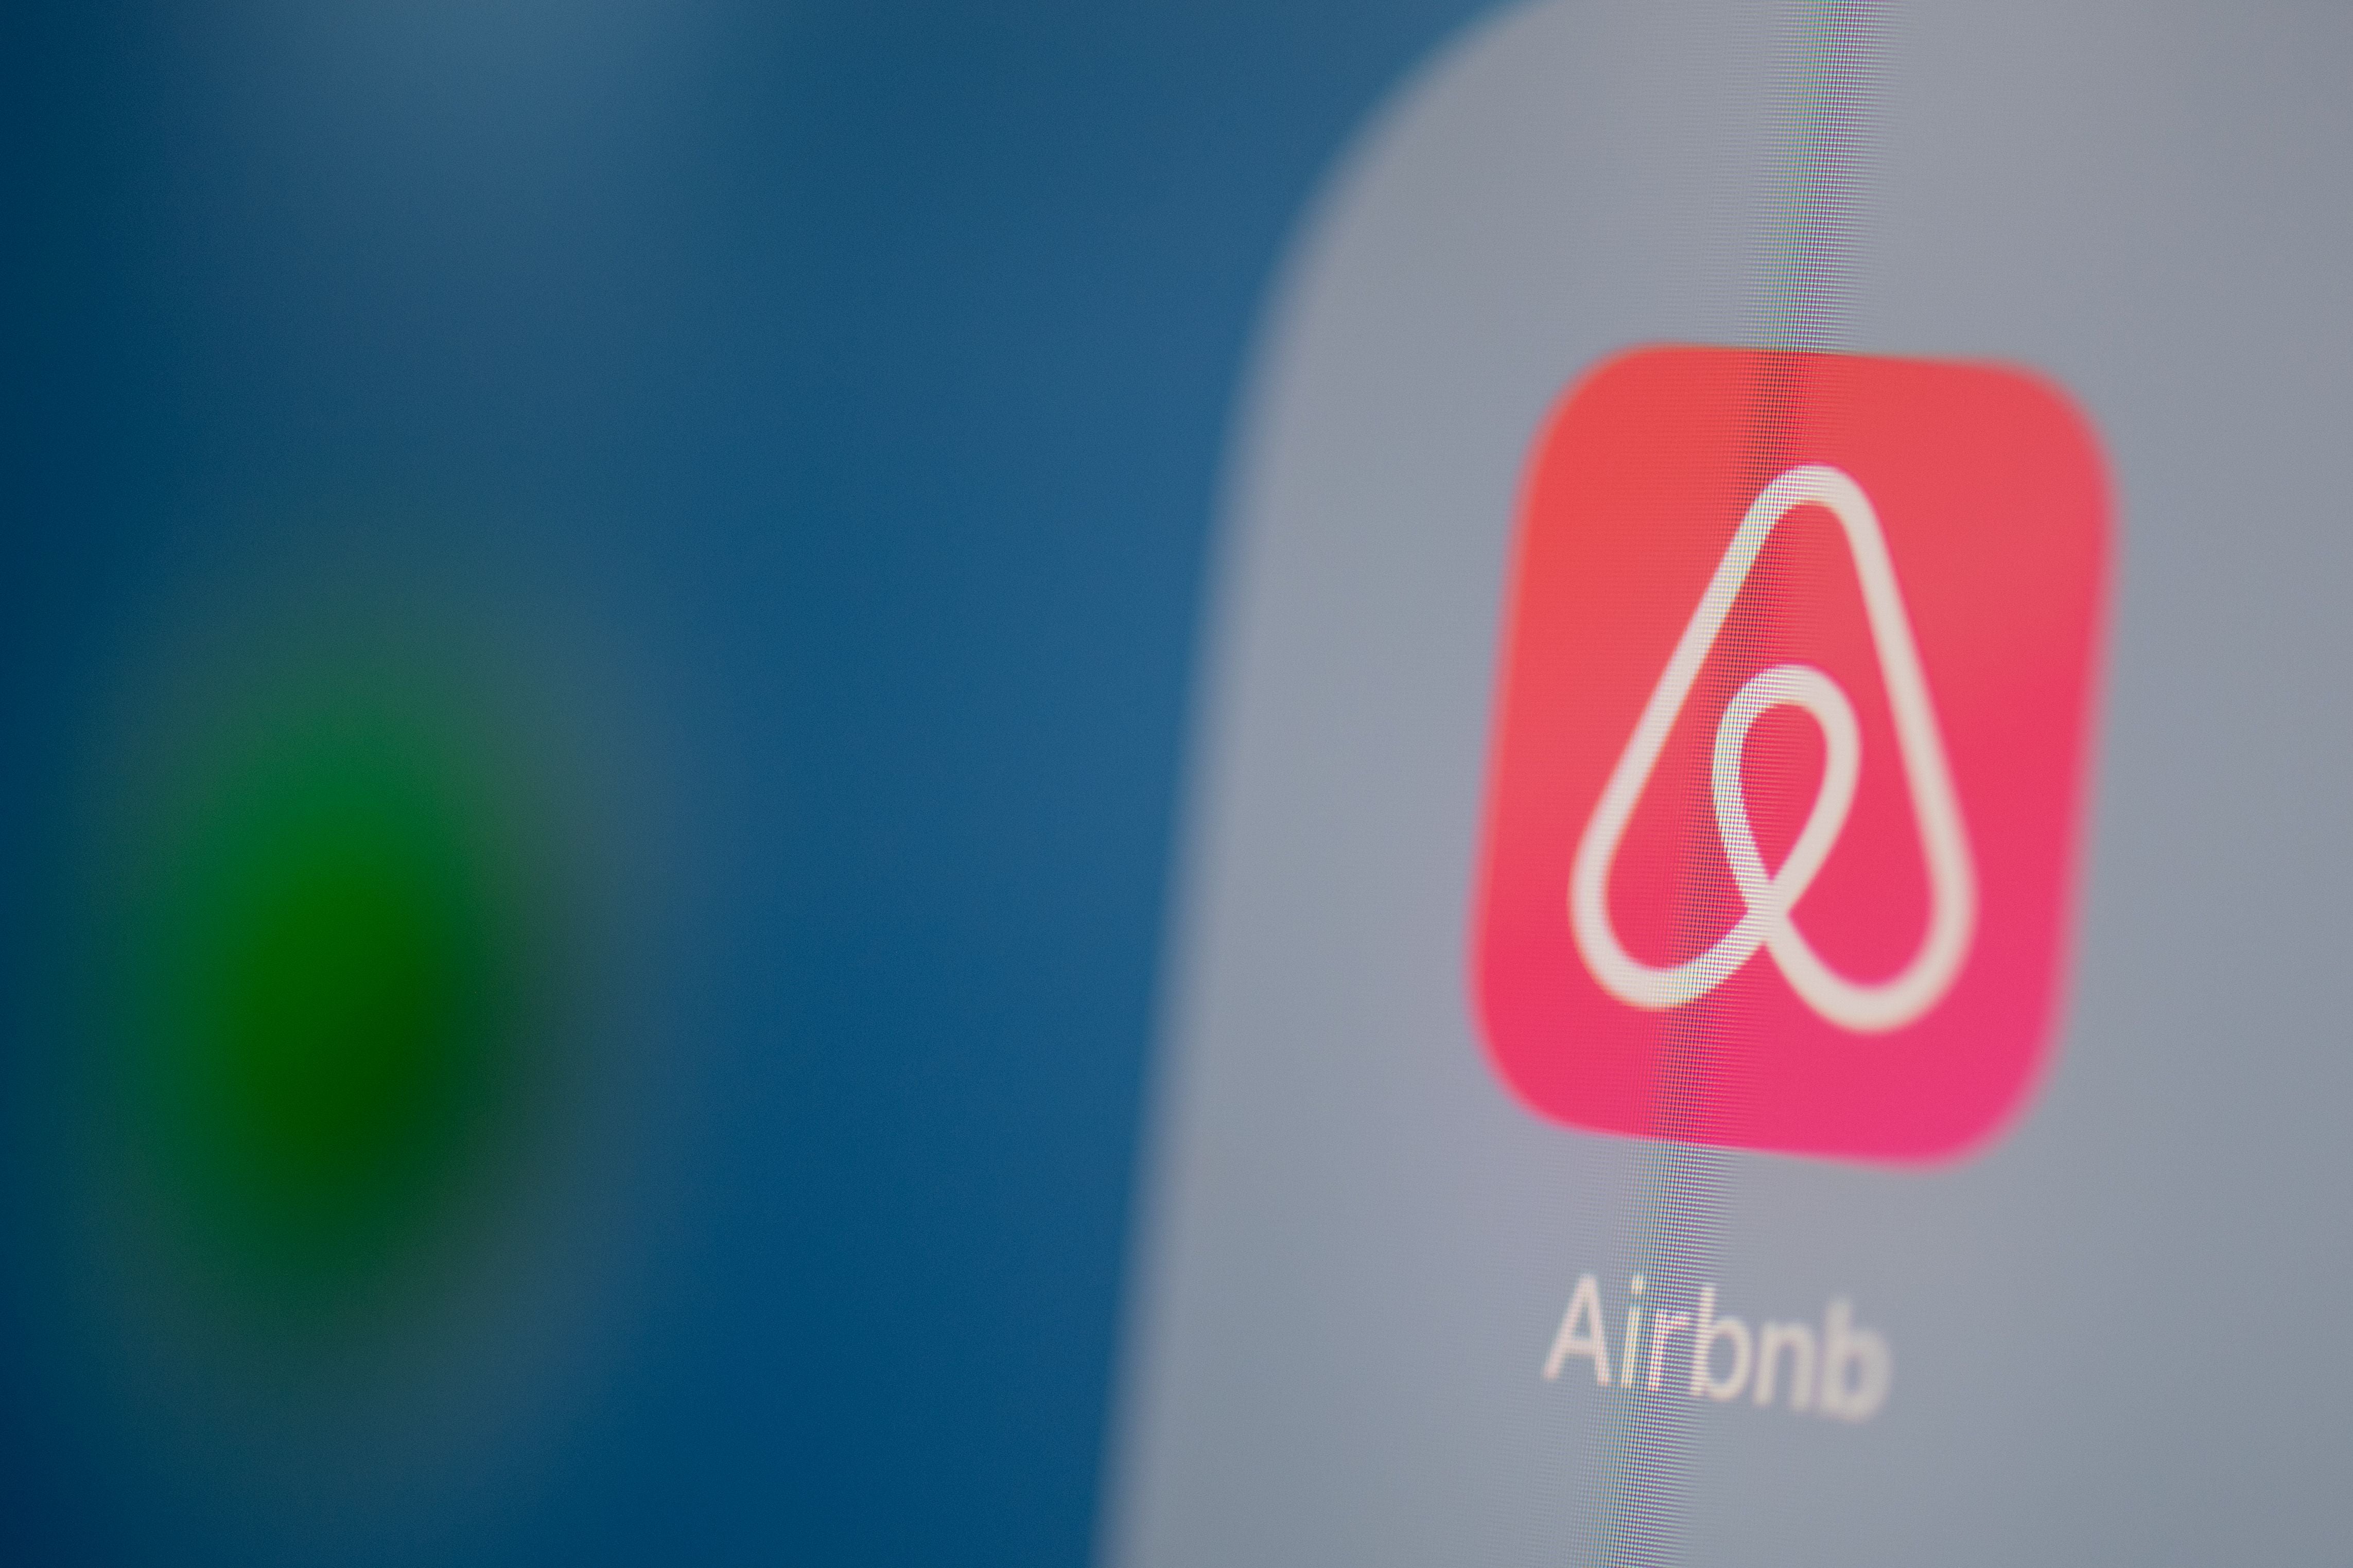 Airbnb hoests also sometimes charges a cleaning fee